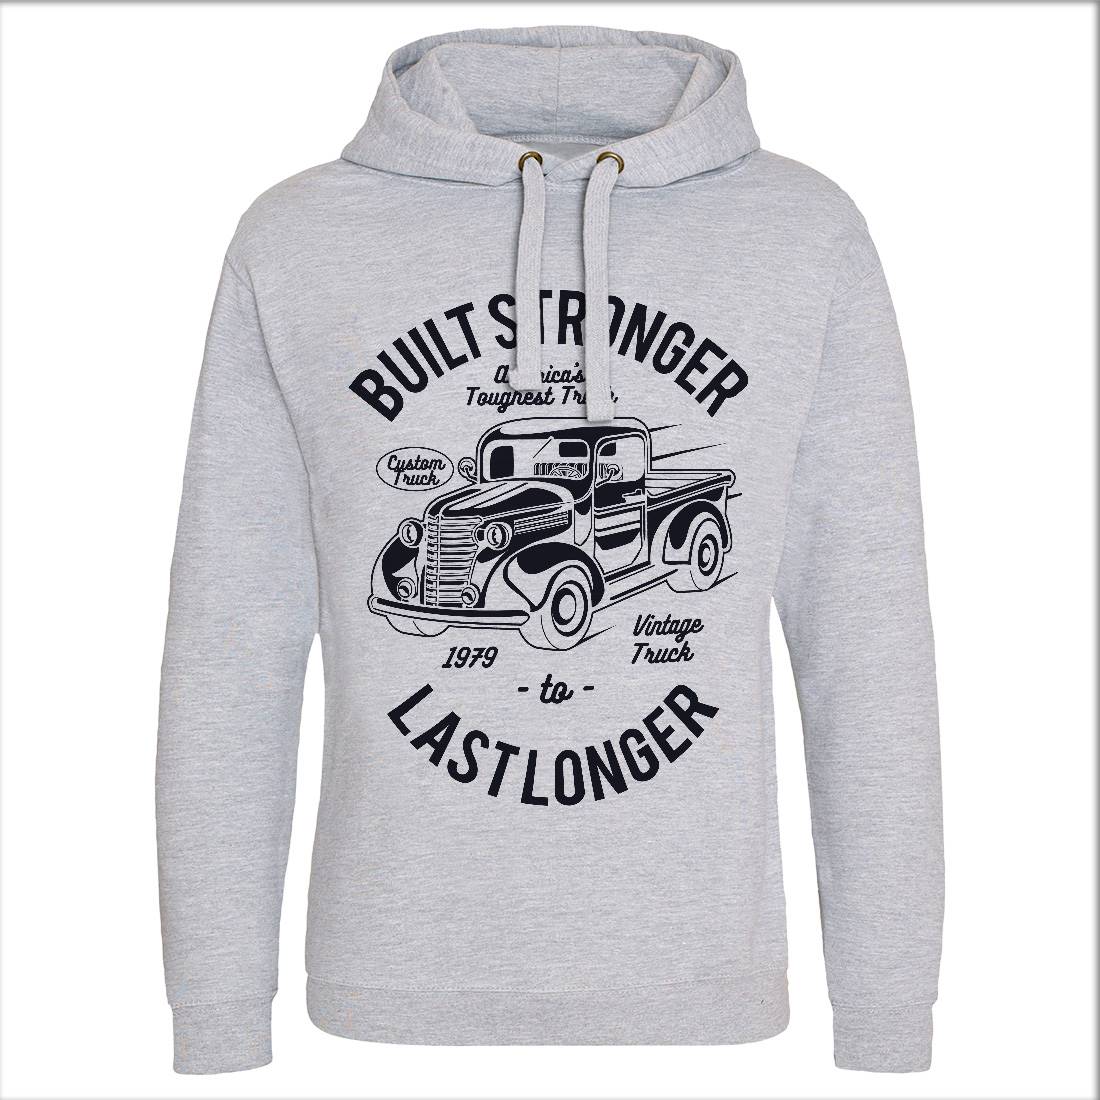 Built Stronger Mens Hoodie Without Pocket Cars A023